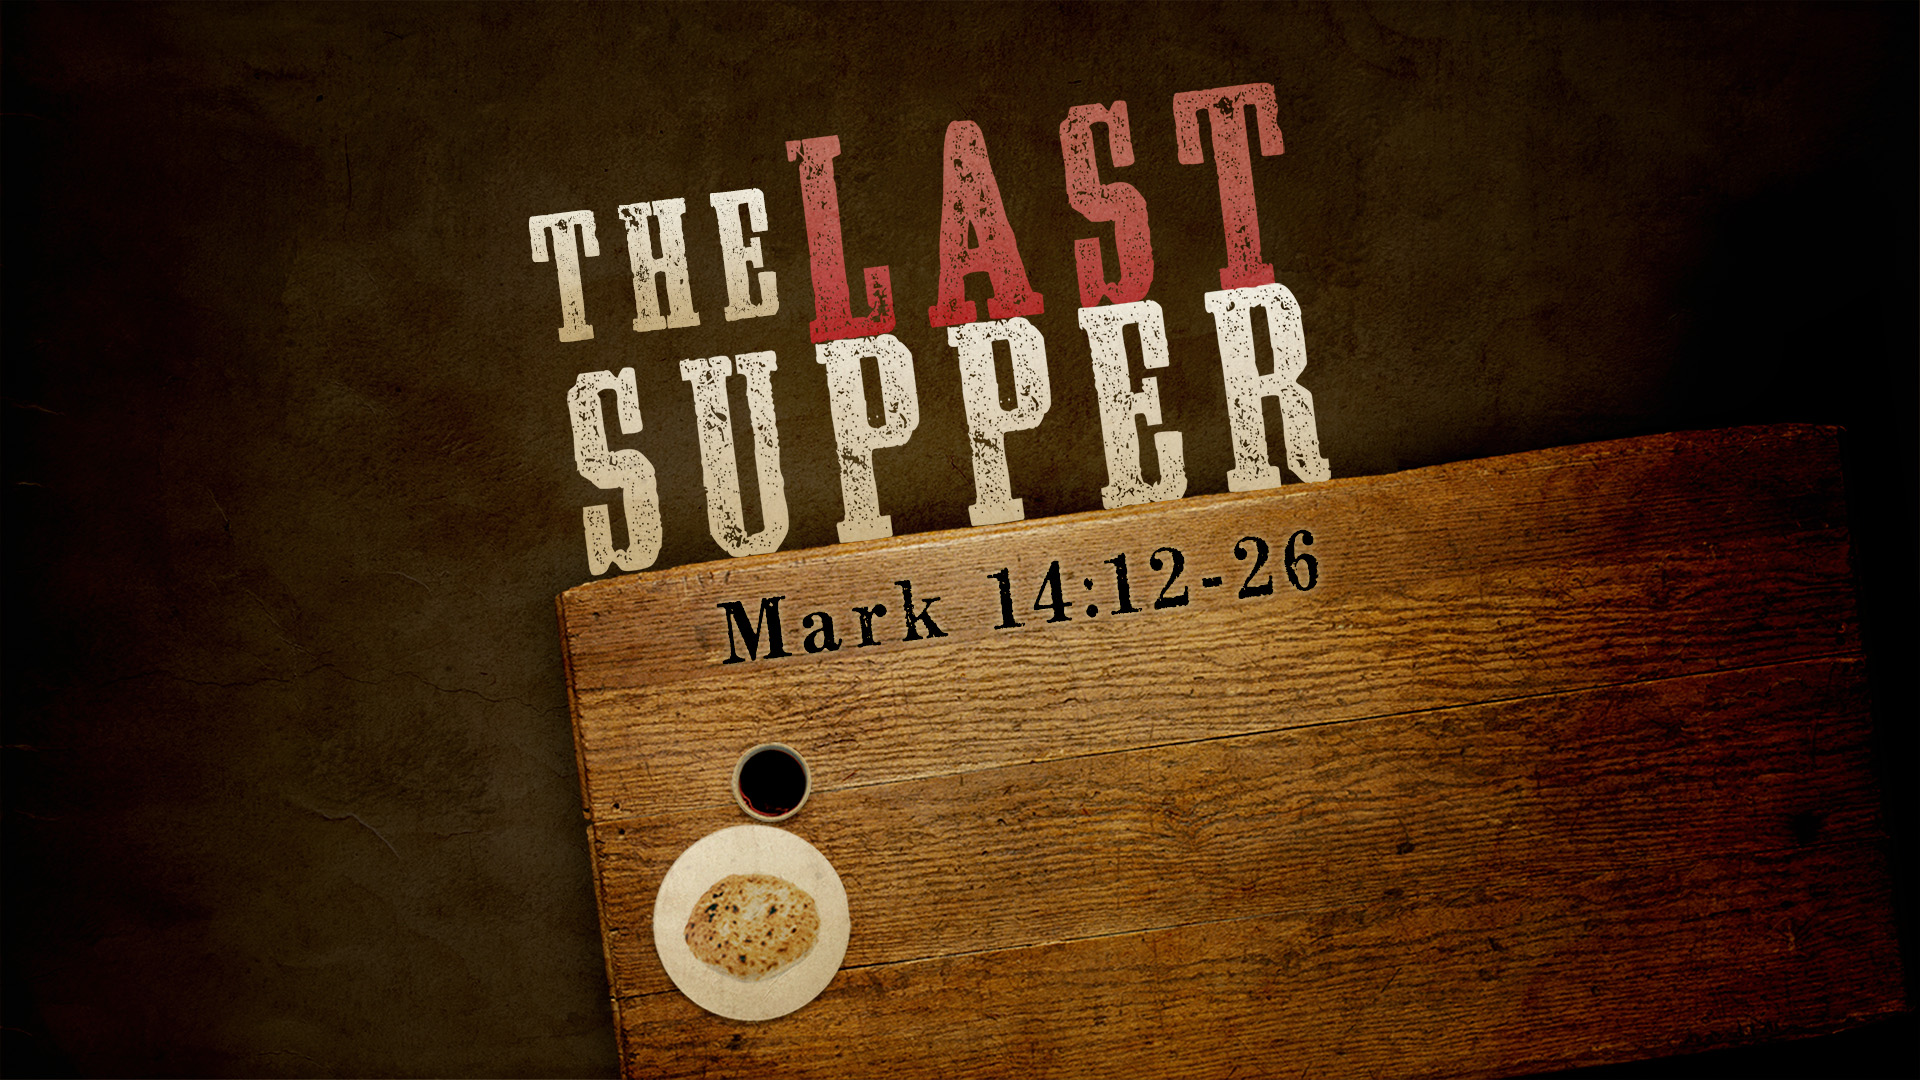 The Last Supper-A Fulfilling Meal